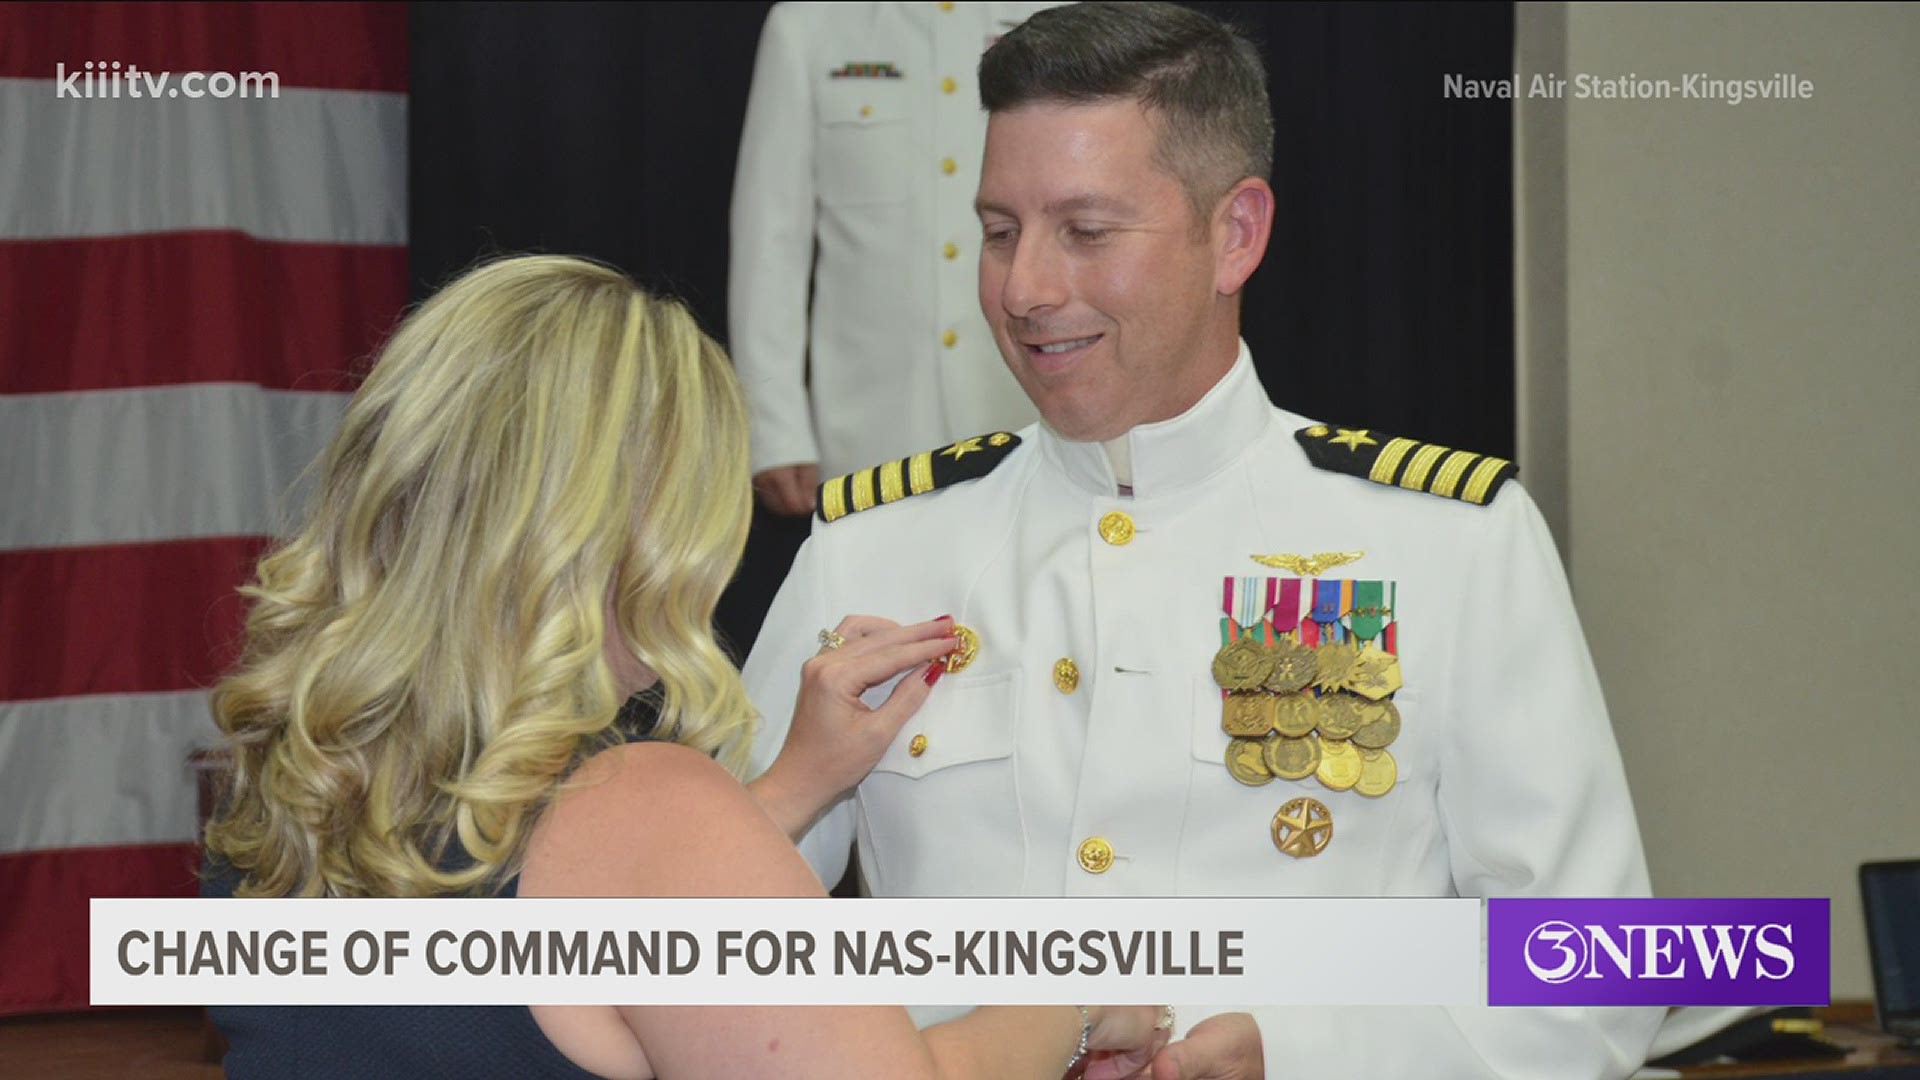 Captain Thomas A. Korsmo is the 35th commanding officer of NAS-K and was last stationed at the Bureau of Naval Personnel in Millington, TN.